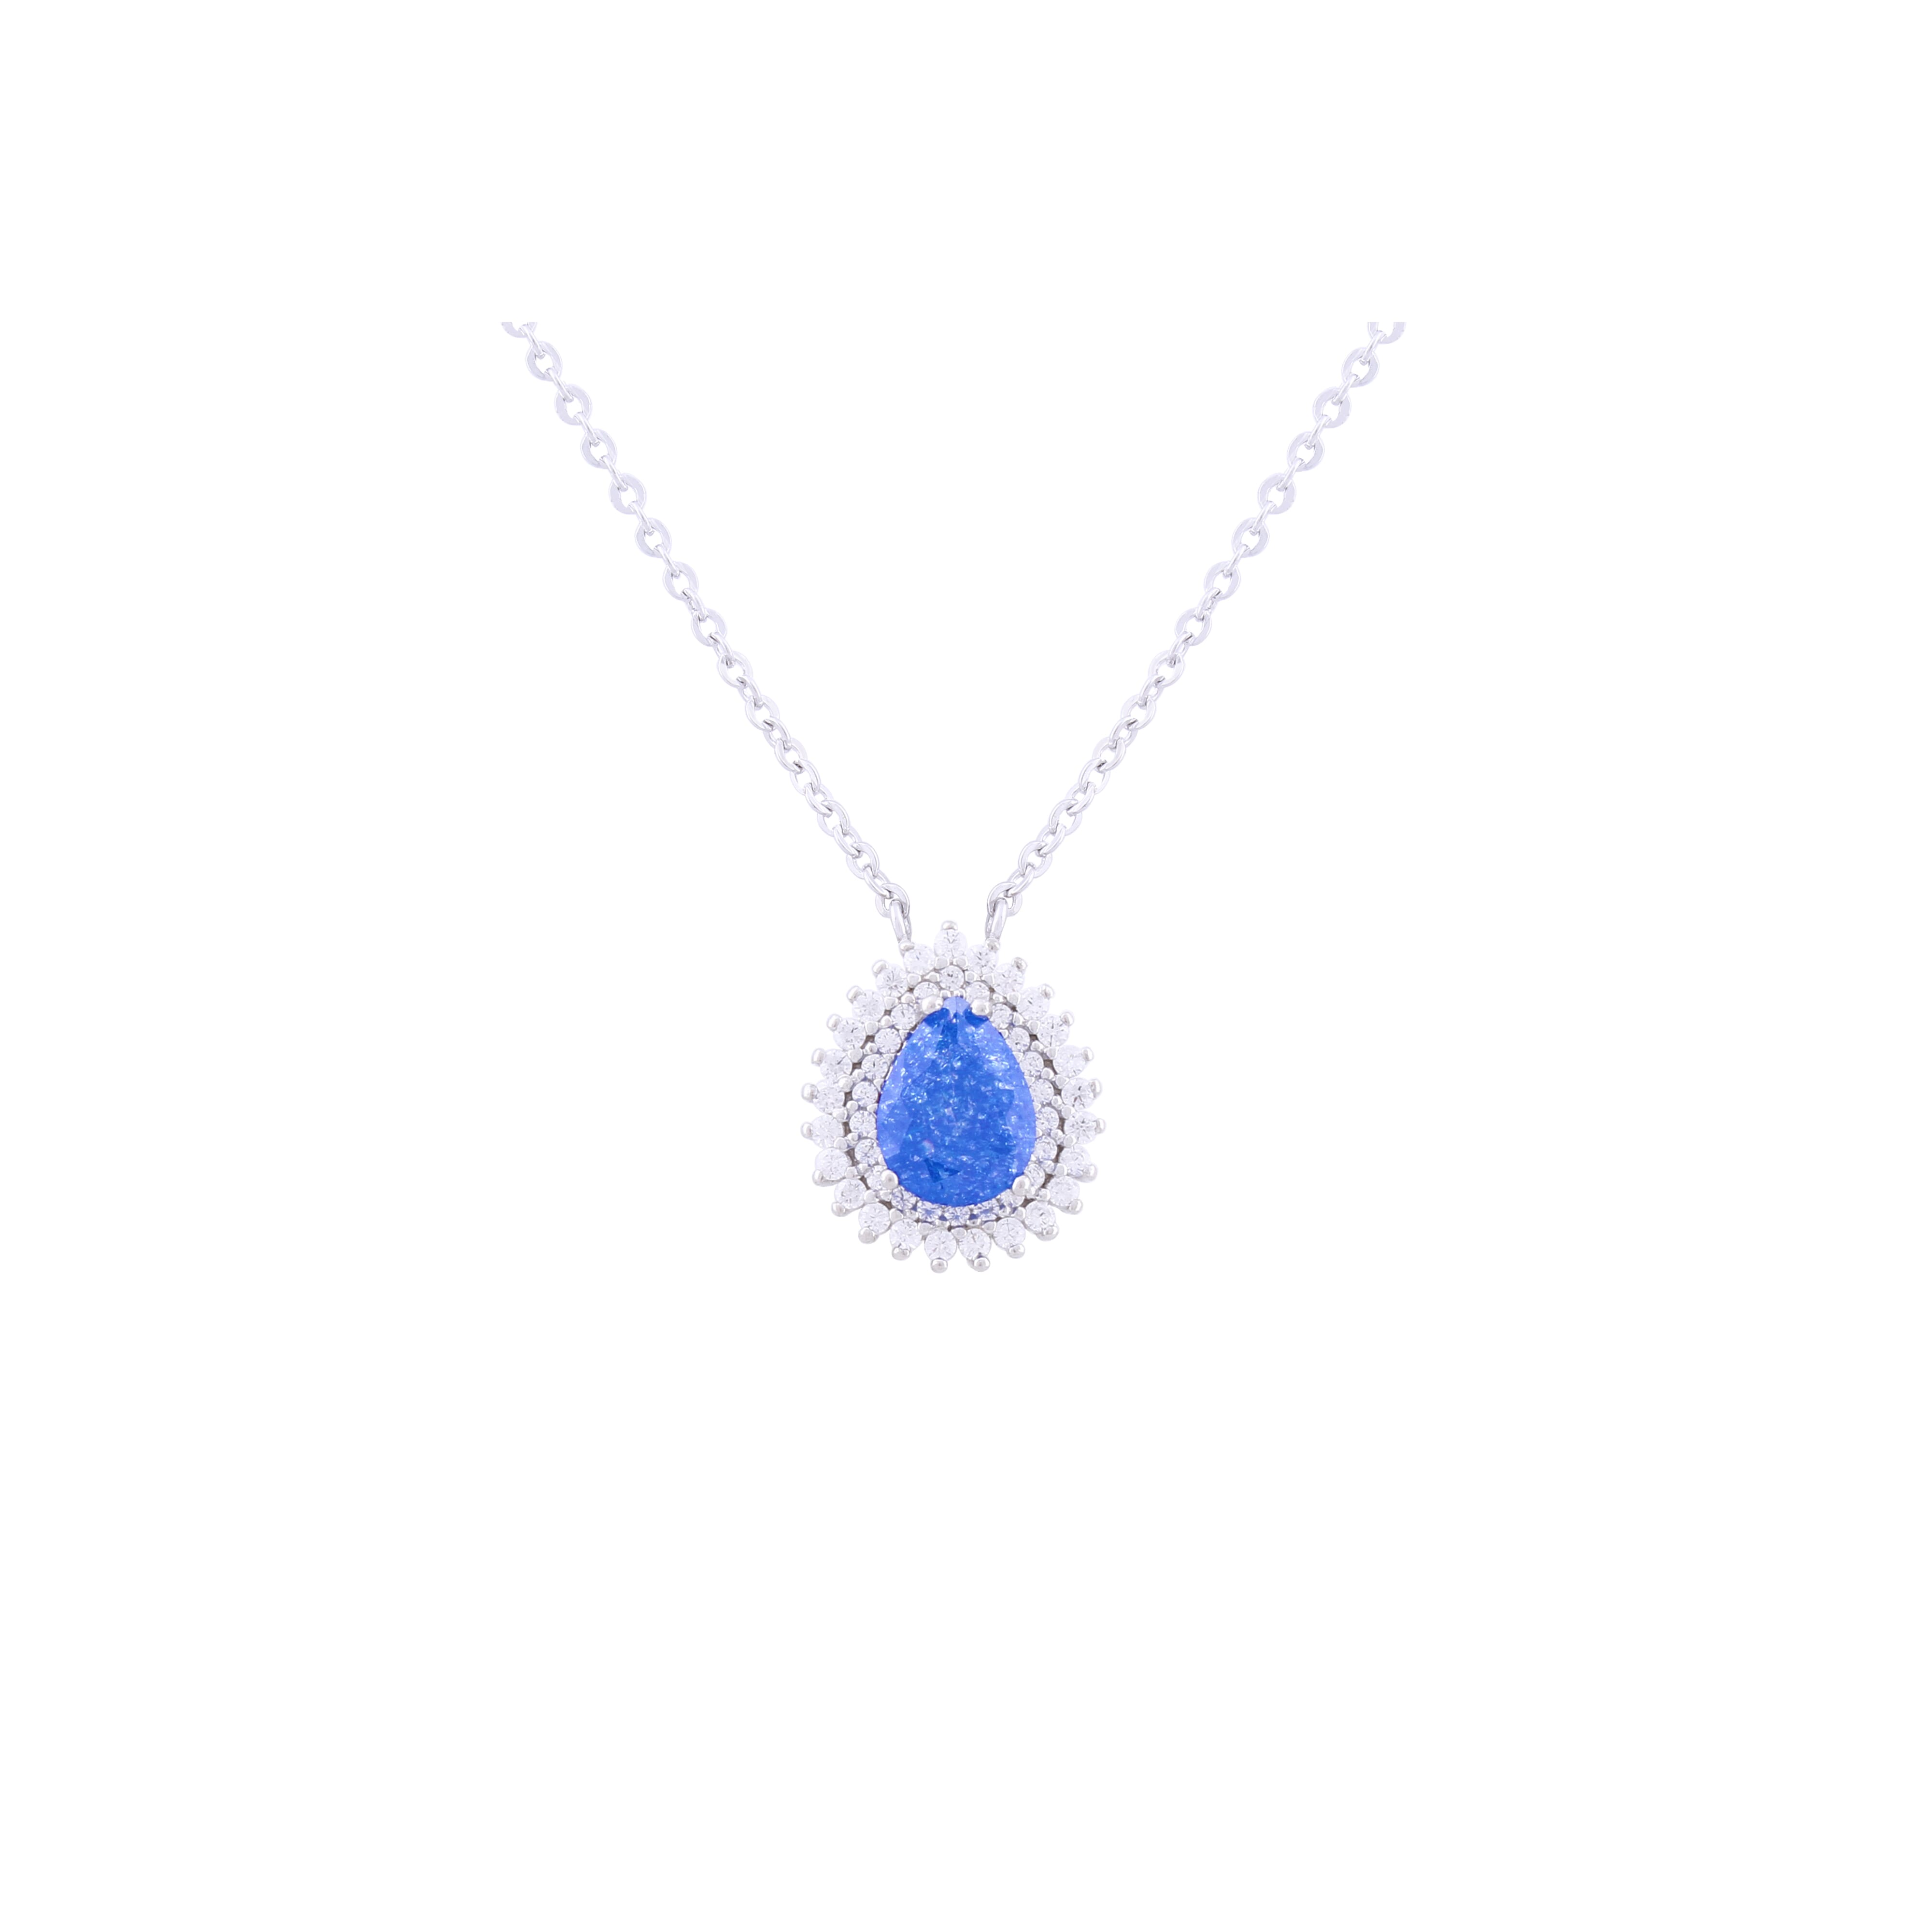 Asfour Crystal 925 Sterling Silver Chain Necklace With Blue Pear Design